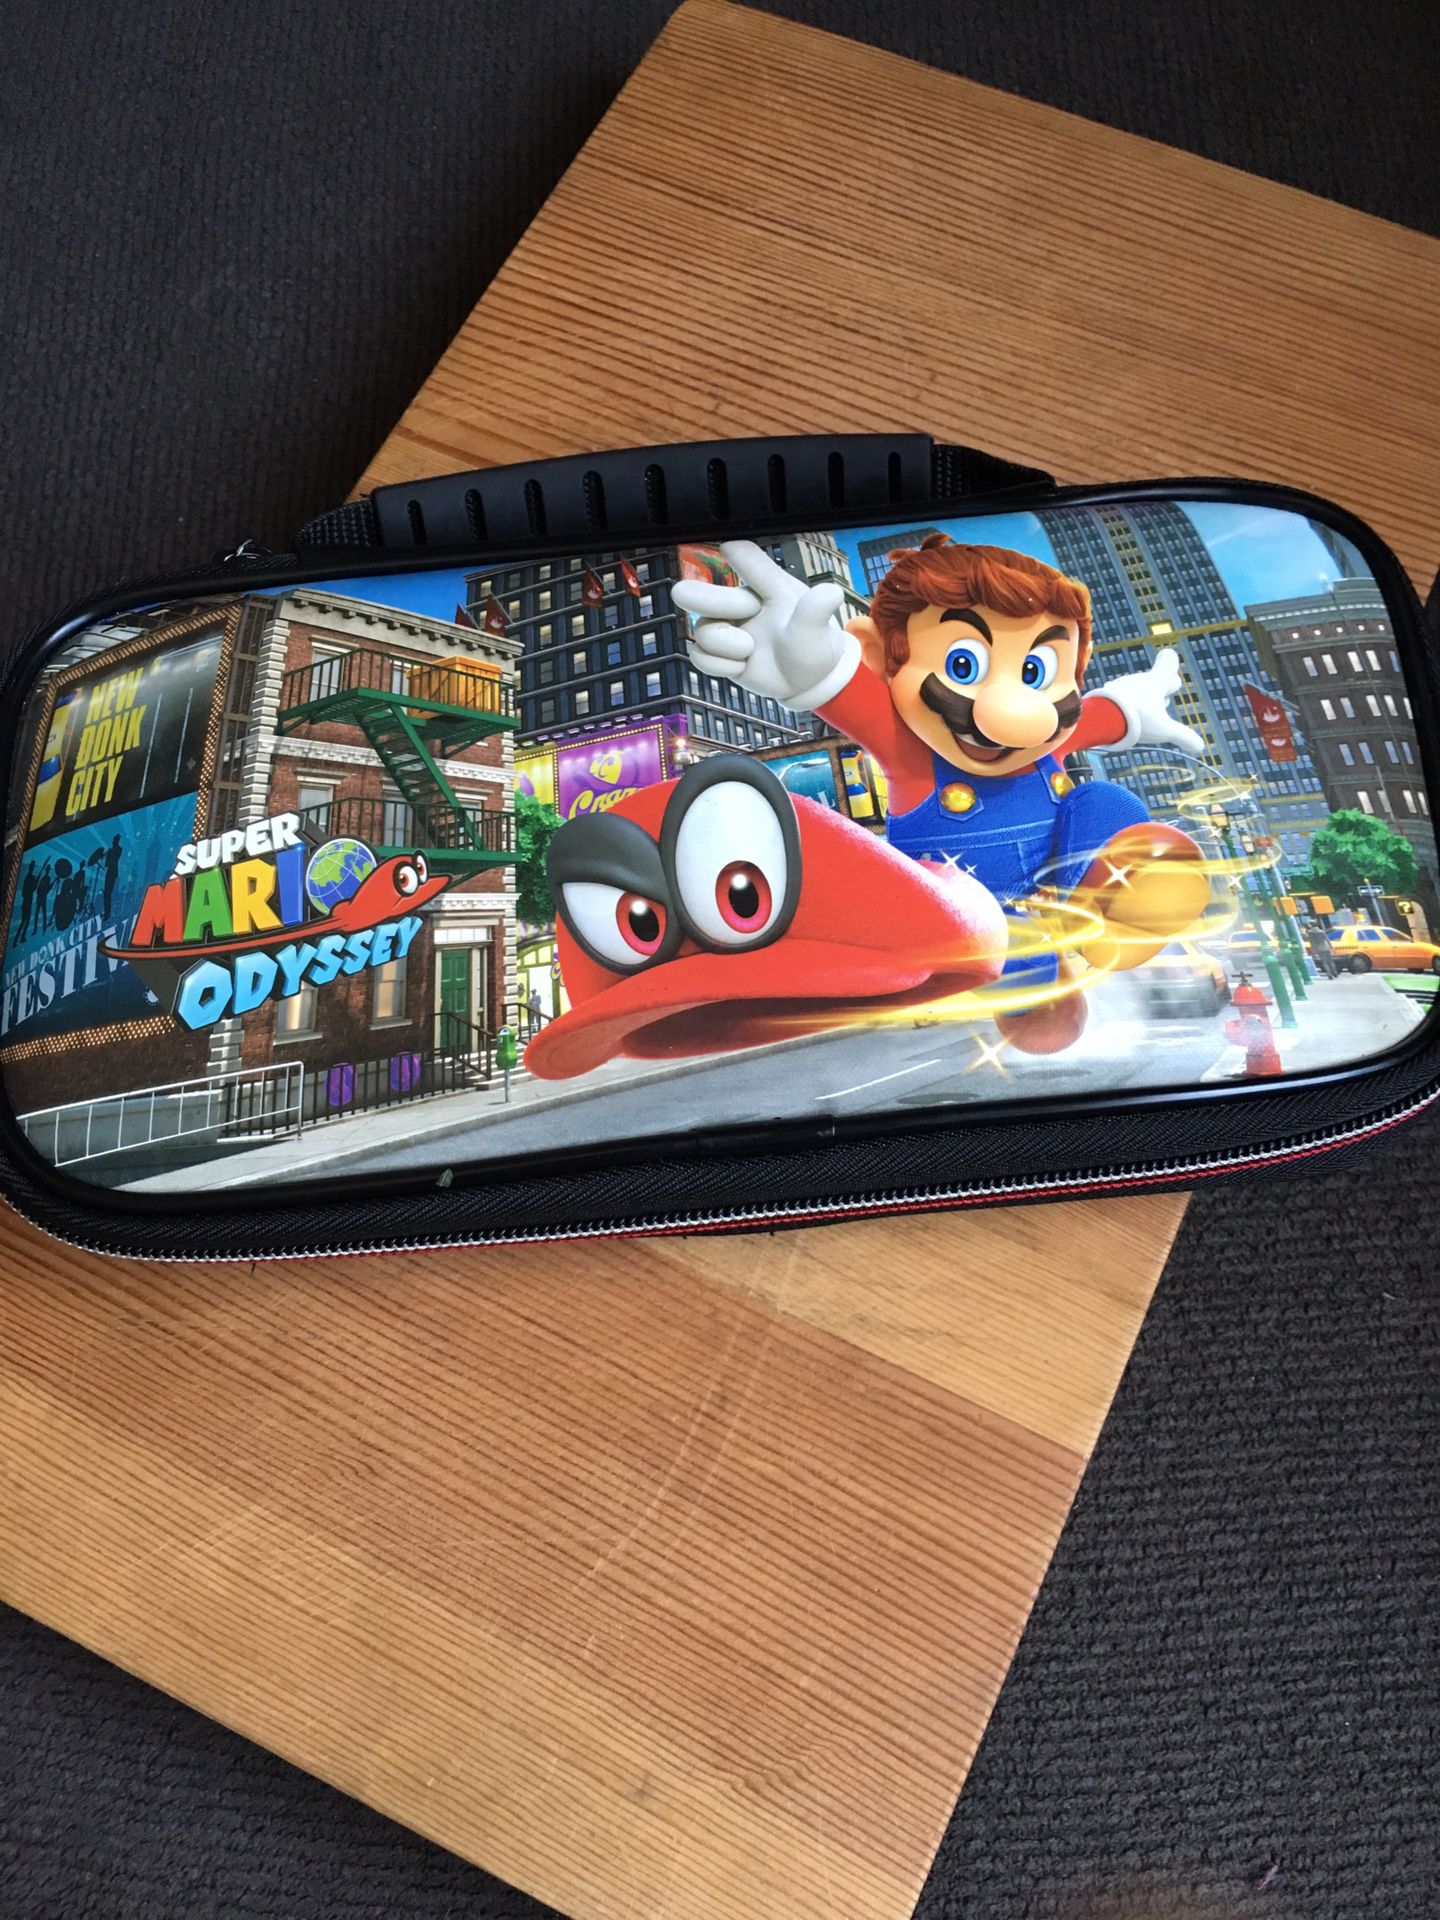 🔥NINTENDO SWITCH CARRYING CASE🔥 - 🔥 MARIO ODYSSEY EDITION🔥 - 🔥GREAT CONDITION🔥